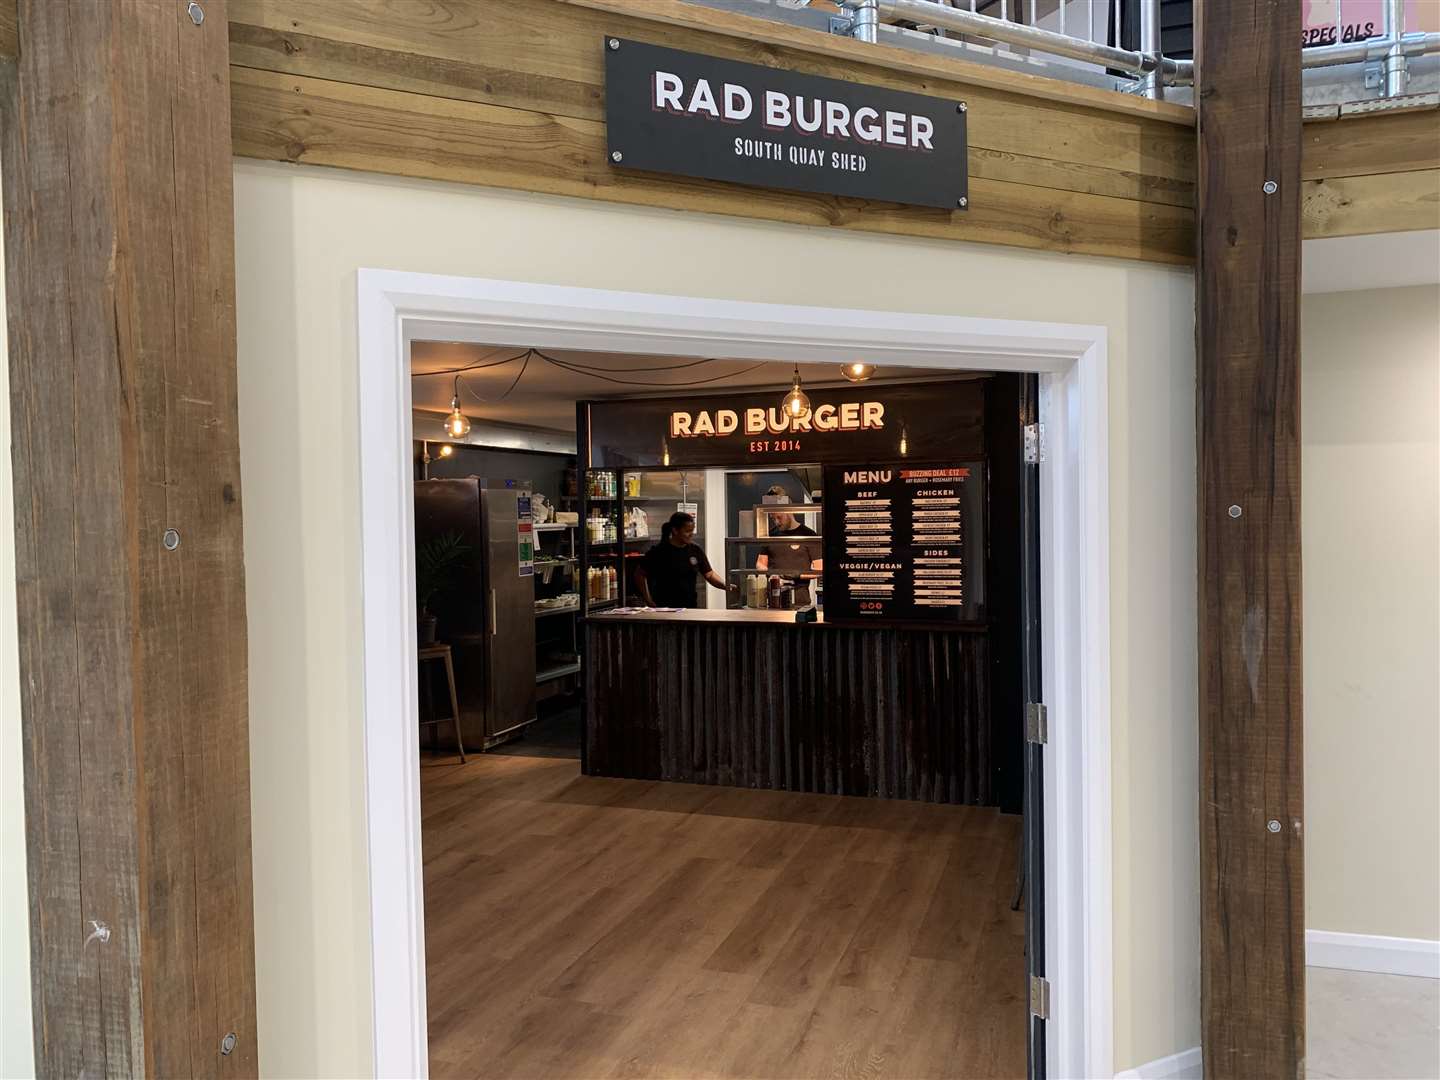 Rad Burger opened at the South Quay Shed in Whitstable harbour. Picture: Canterbury City Council